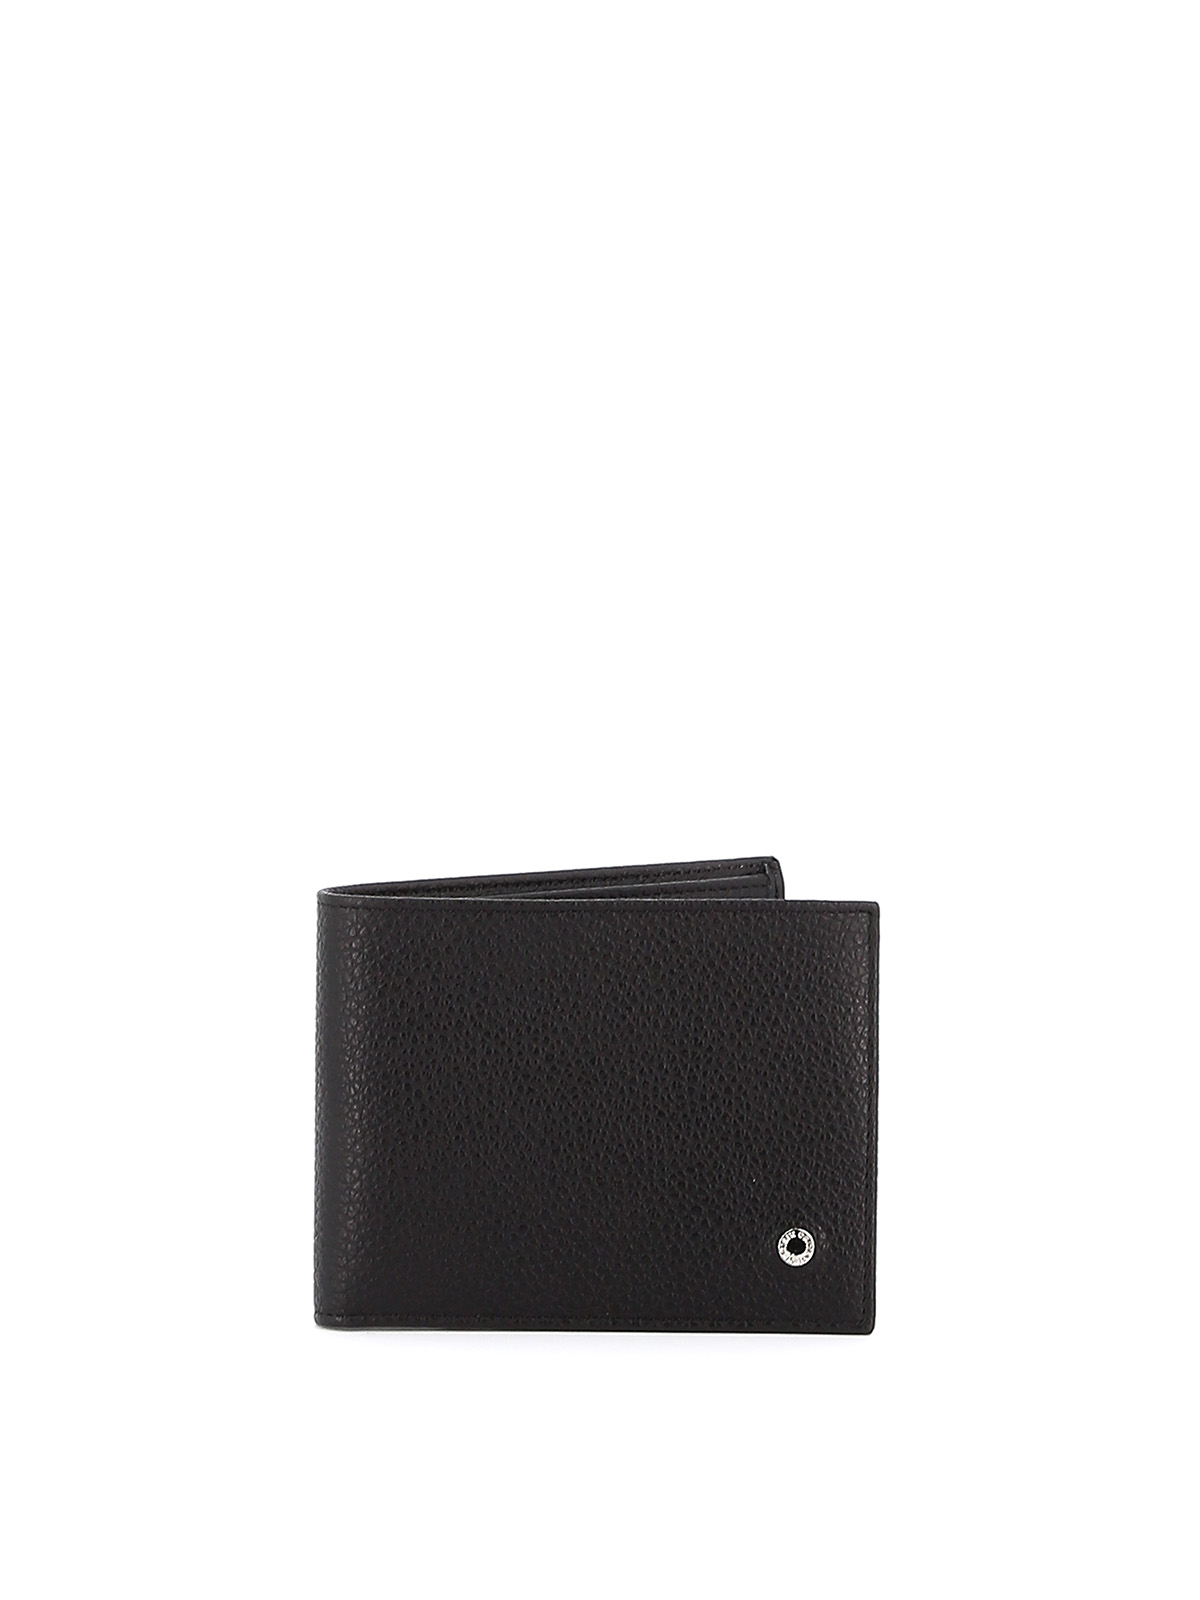 Orciani Black Grainy Leather Bifold Wallet